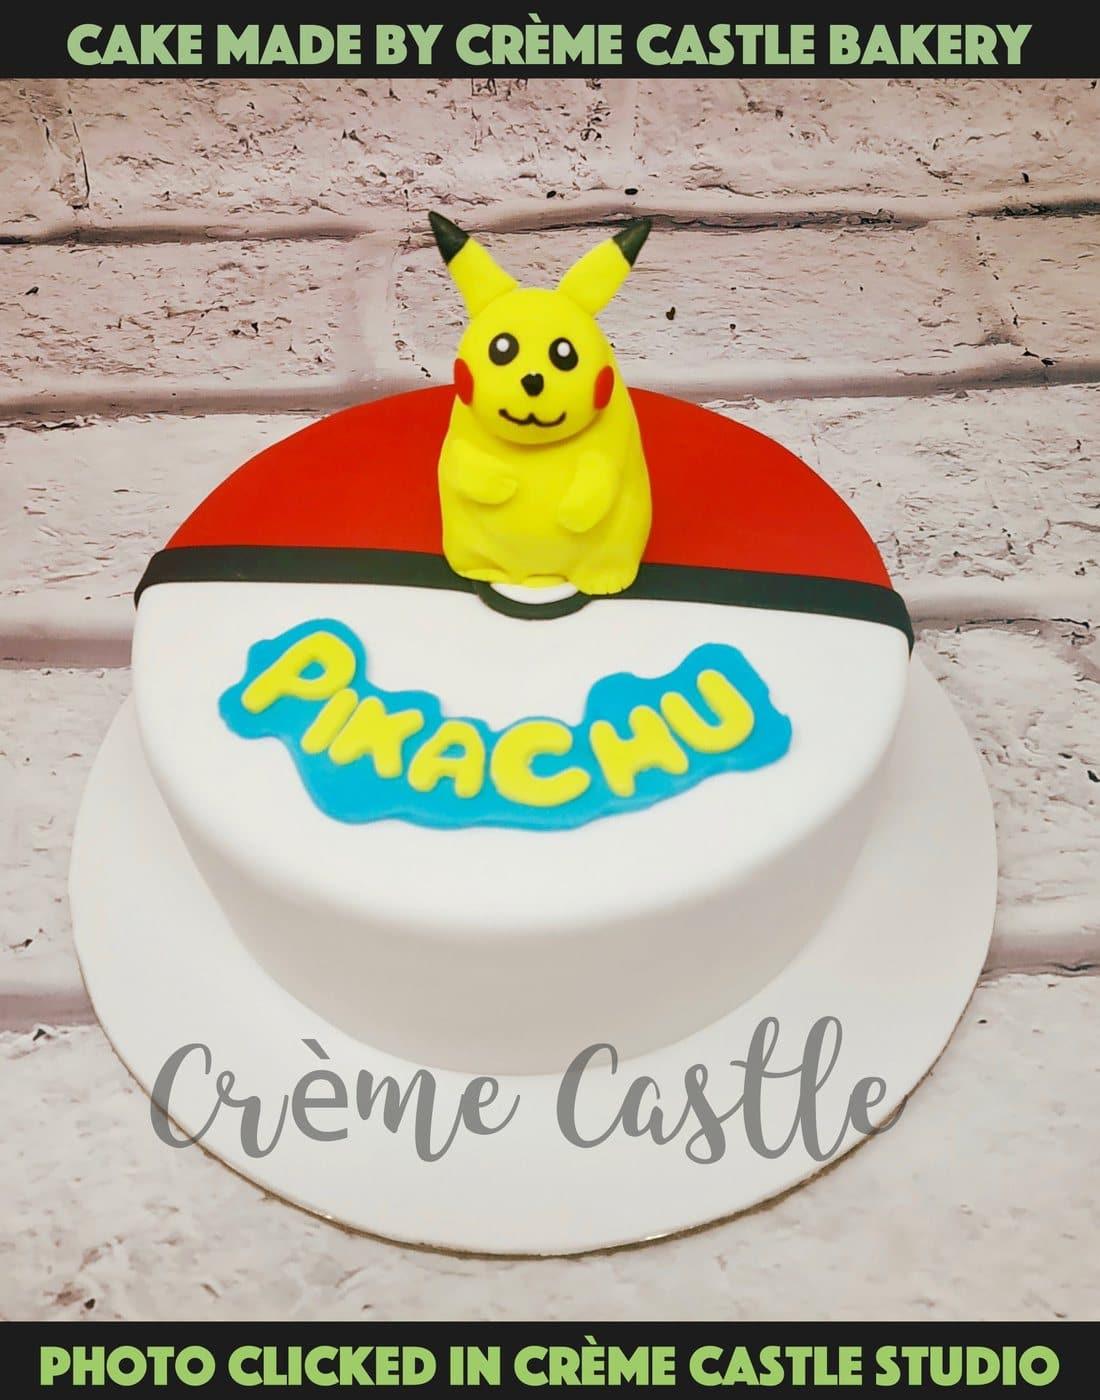 Dear Harley Confectionery & Design - Standing Pikachu 3D Cake! ⚡️⚡️ A sweet  daddy ordered this adorable pikachu for Riley's birthday party last week🎂  In my job I see so many lovely